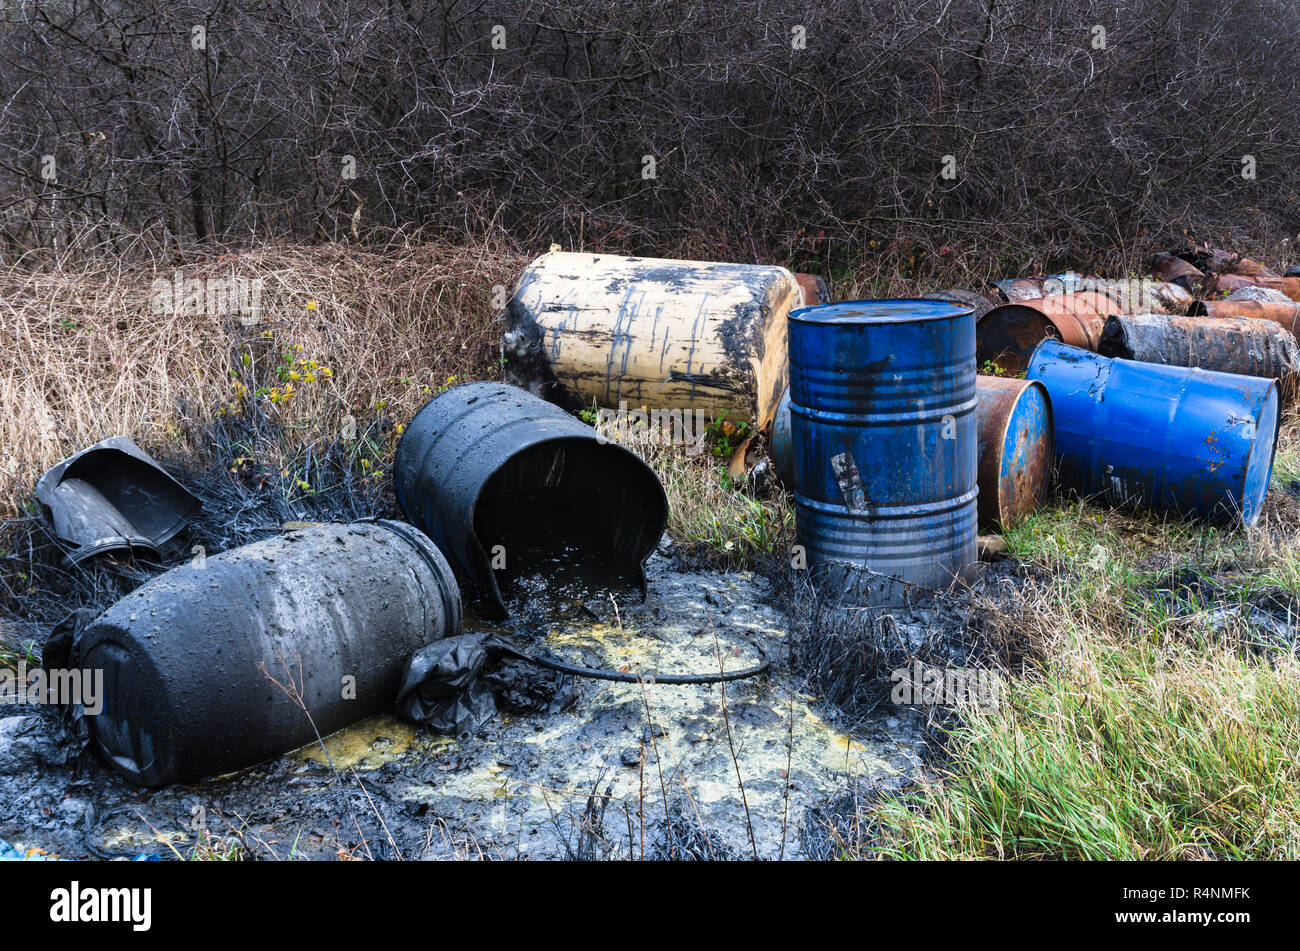 Barrels of toxic waste in nature, pollution of the environment Stock Photo